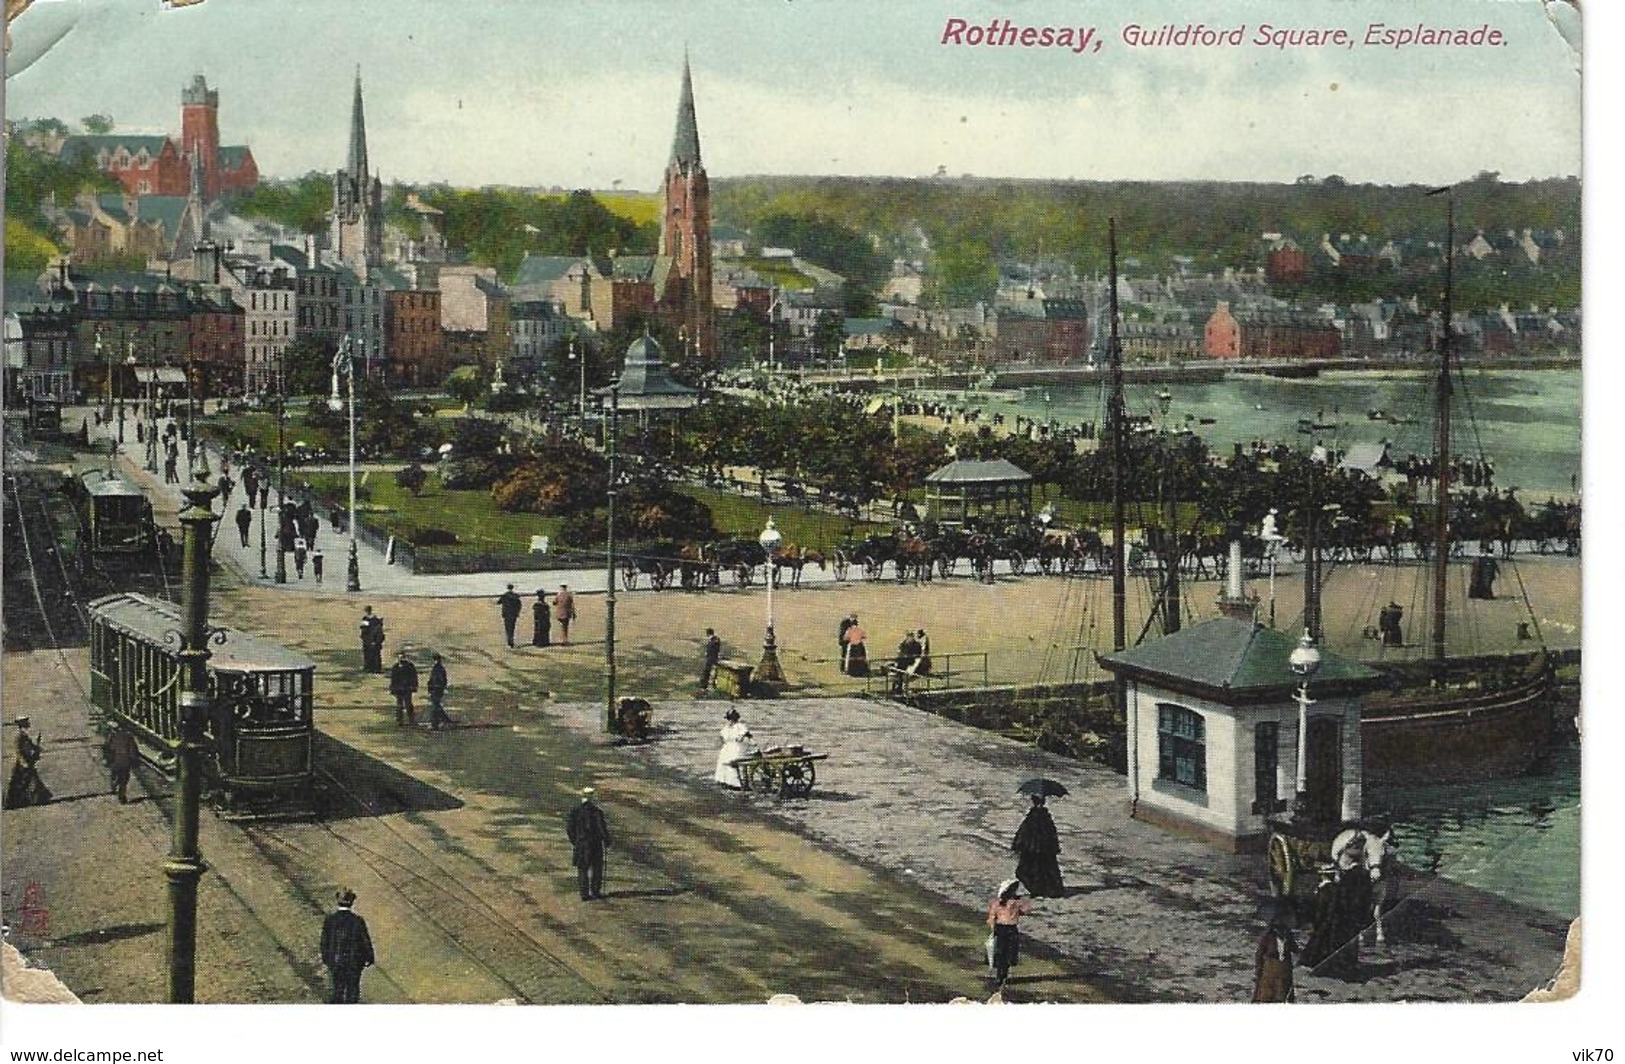 Rothesay Guildford Square Esplanade - Bute